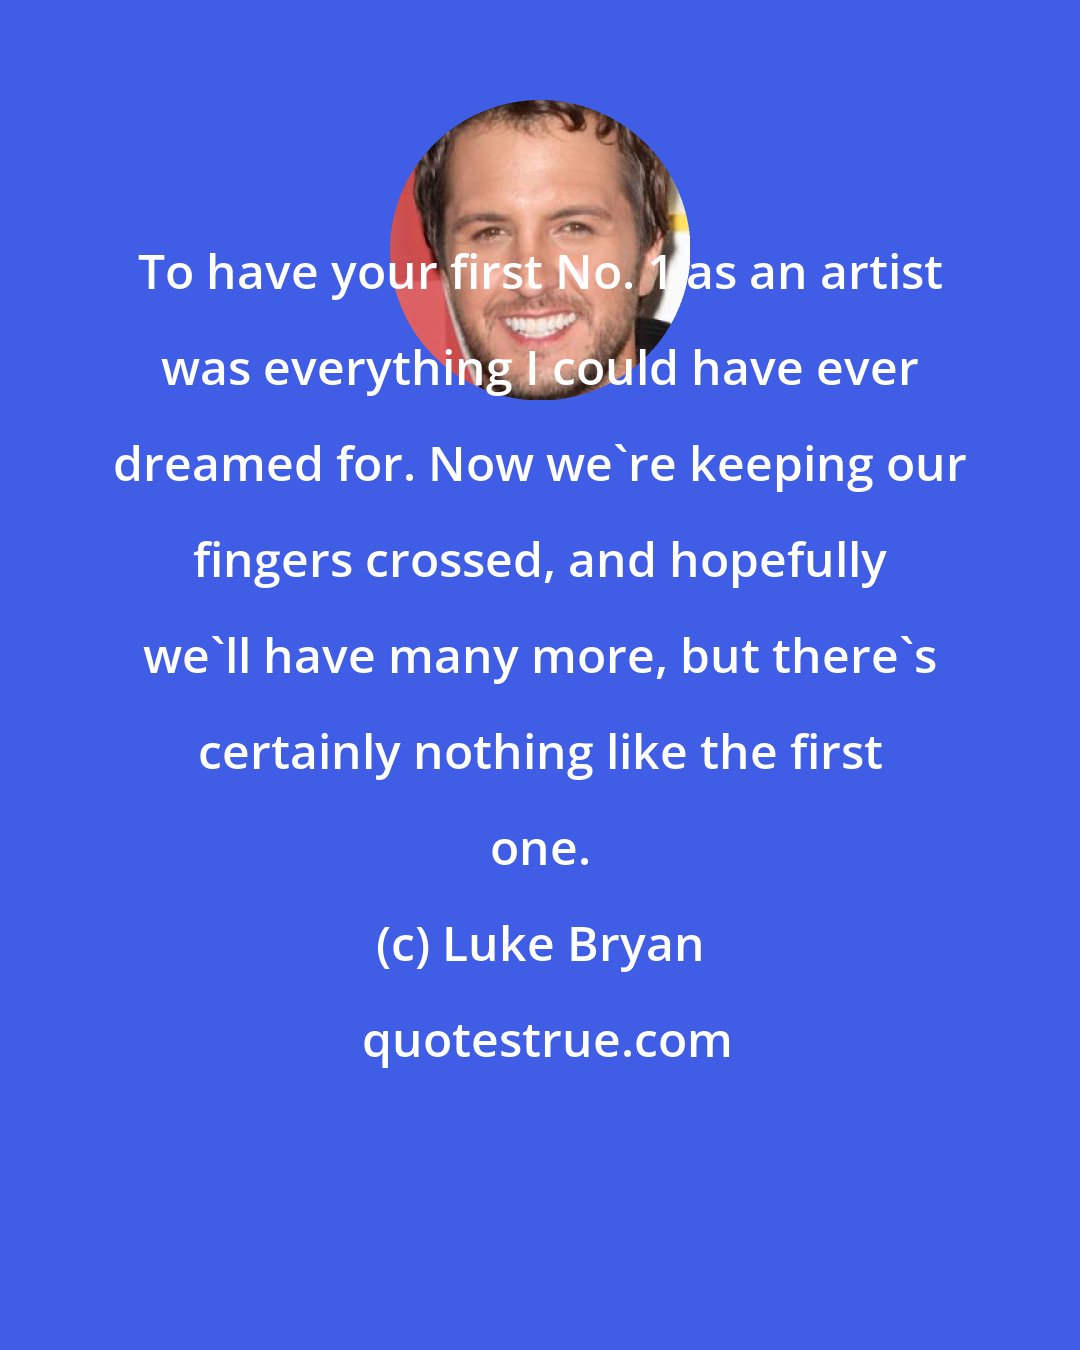 Luke Bryan: To have your first No. 1 as an artist was everything I could have ever dreamed for. Now we're keeping our fingers crossed, and hopefully we'll have many more, but there's certainly nothing like the first one.